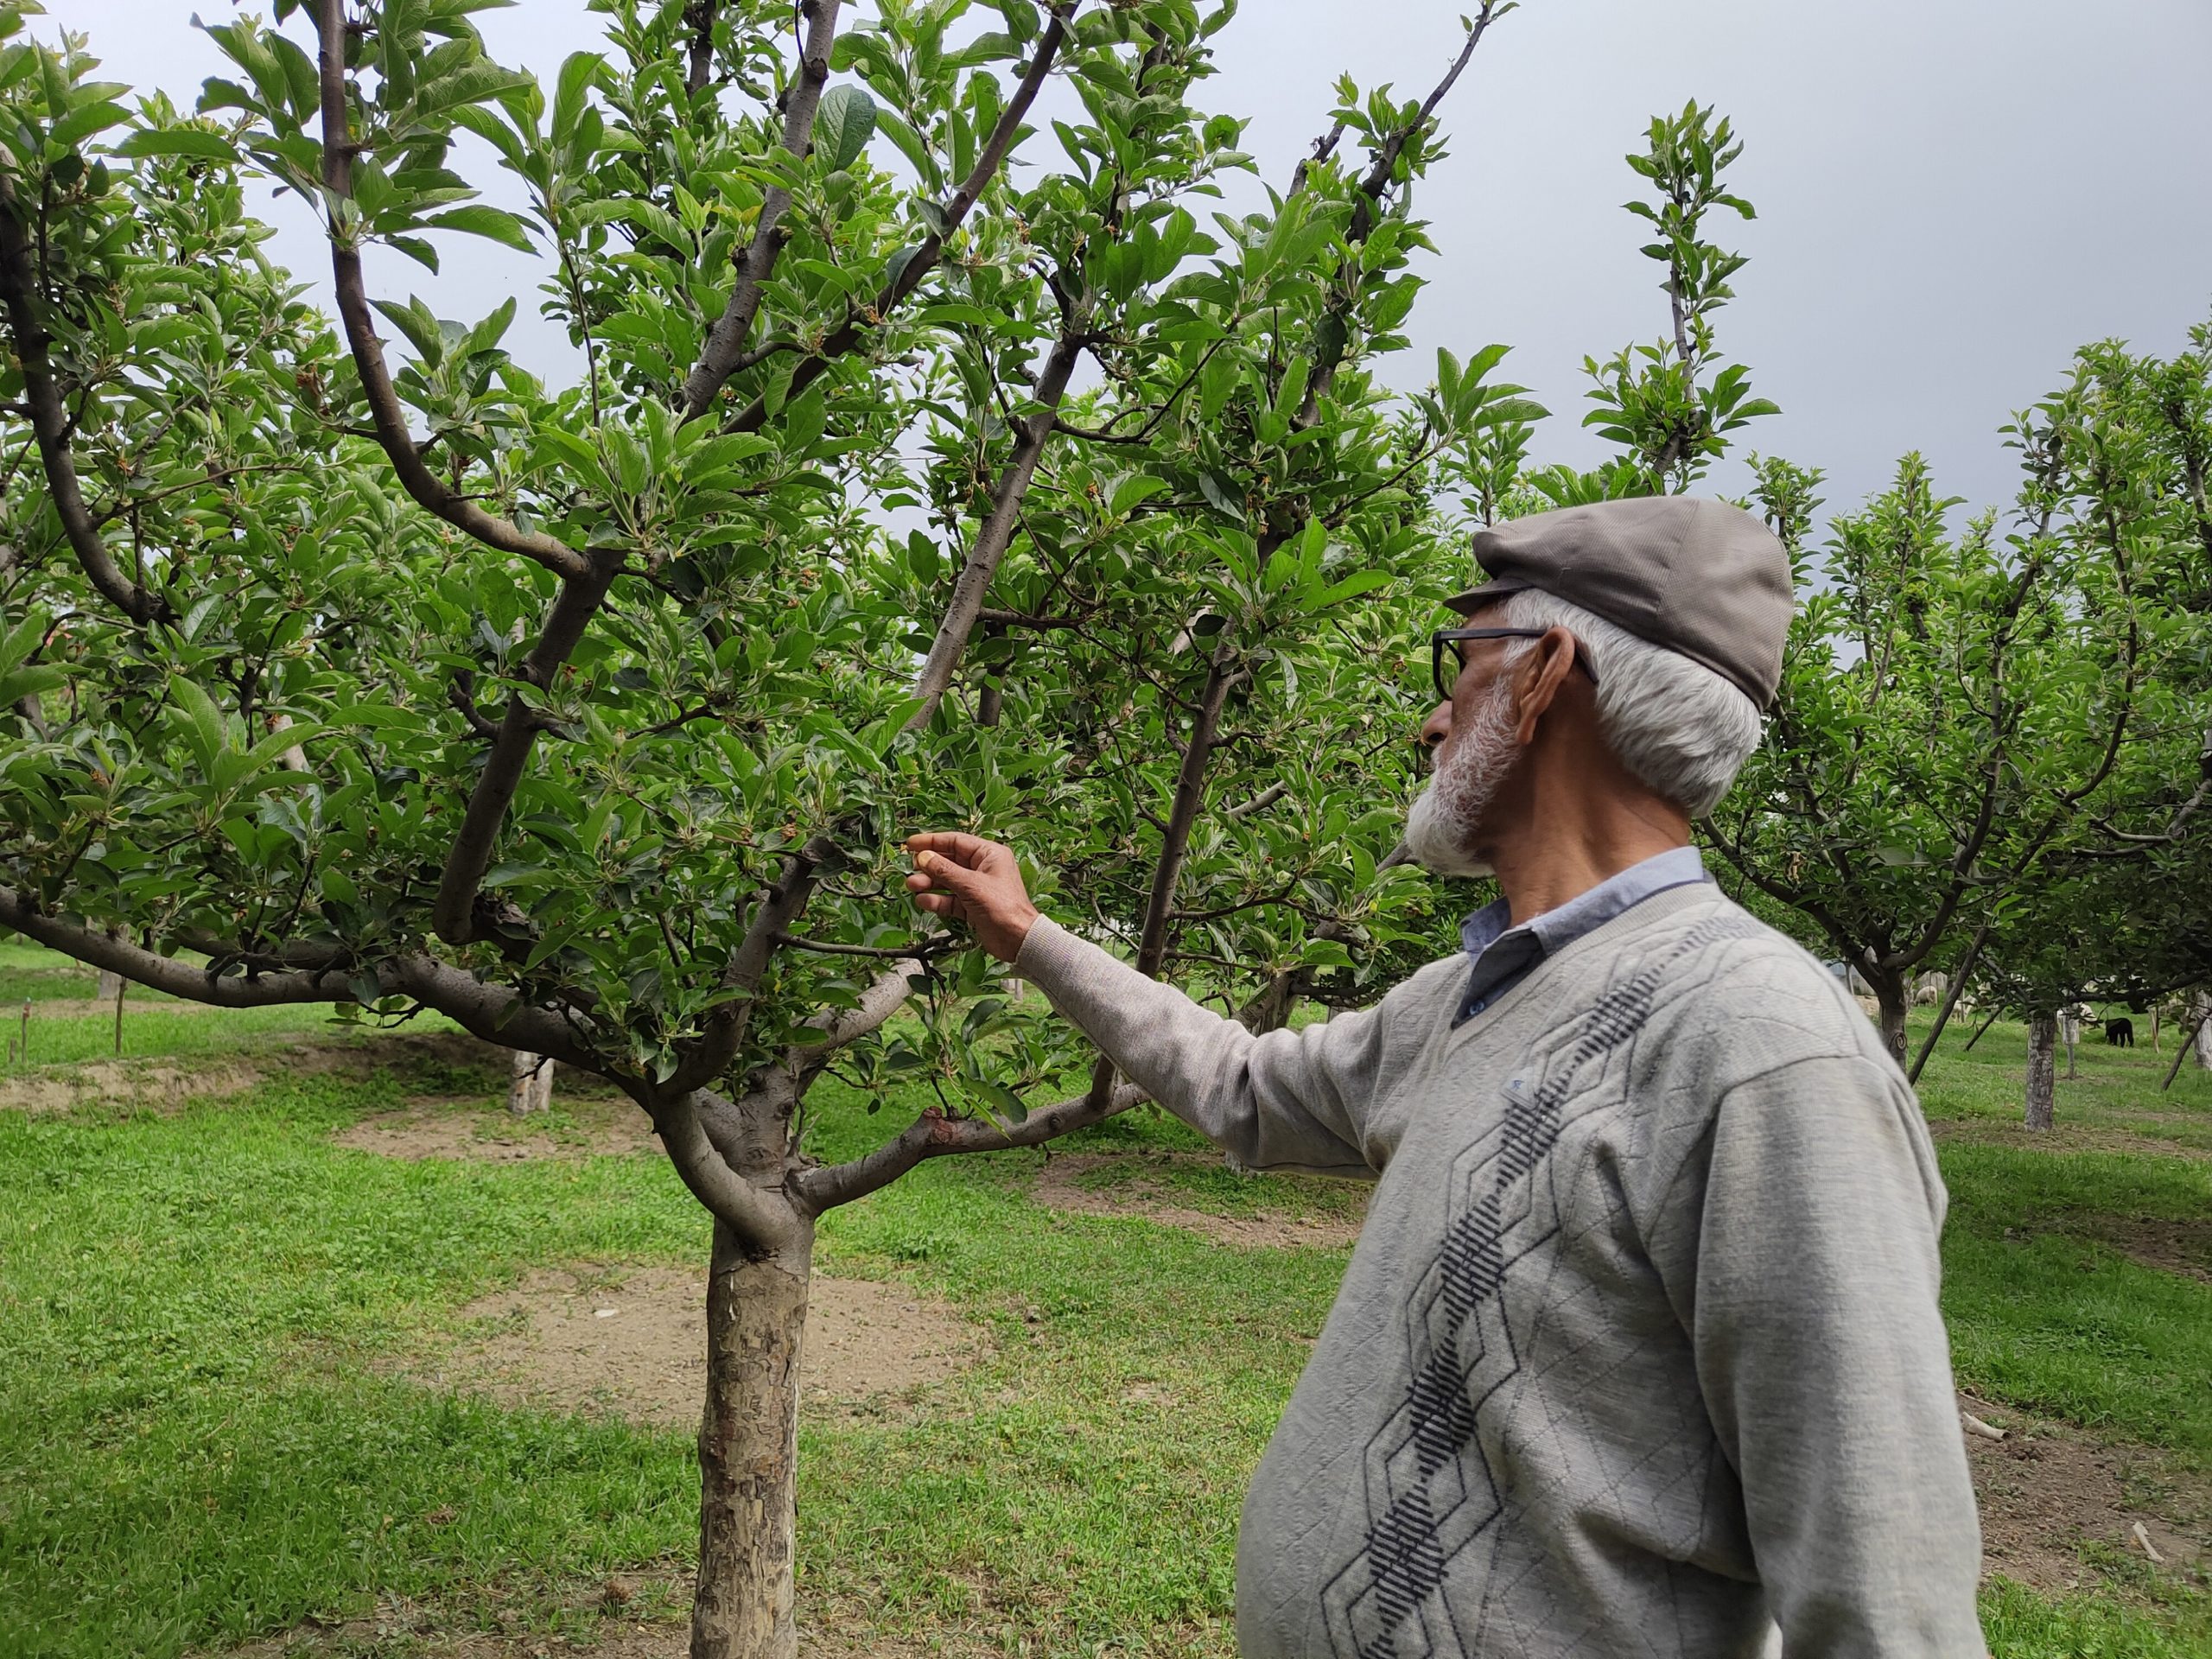 Jammu & Kashmir experiences a drop in temperature and heavy rainfall affecting apple pollination in Kashmir